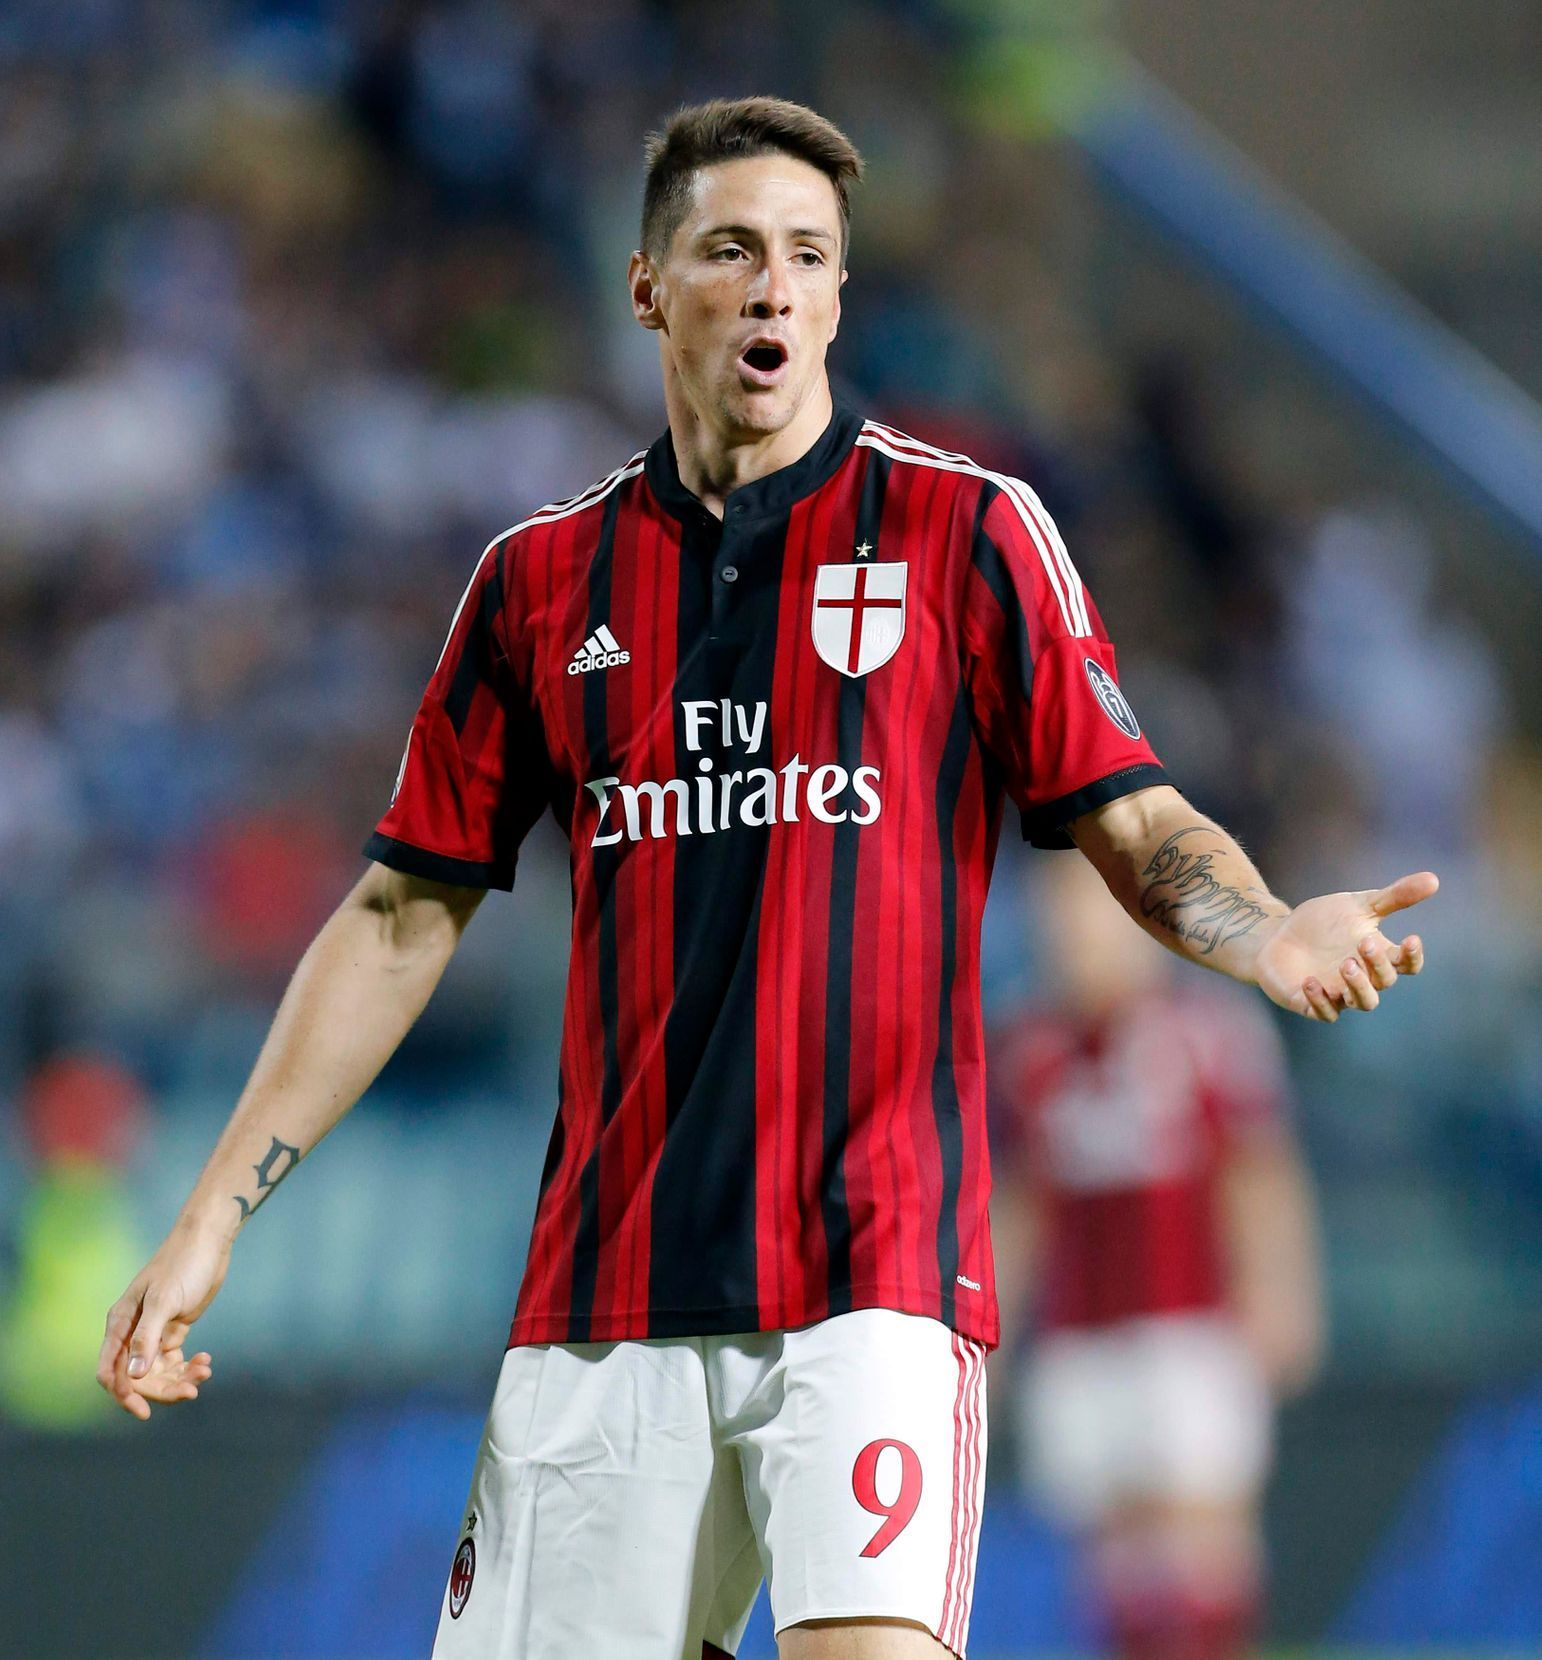 AC Milan's Torres reacts during their Italian Serie A soccer match against Empoli in Empoli